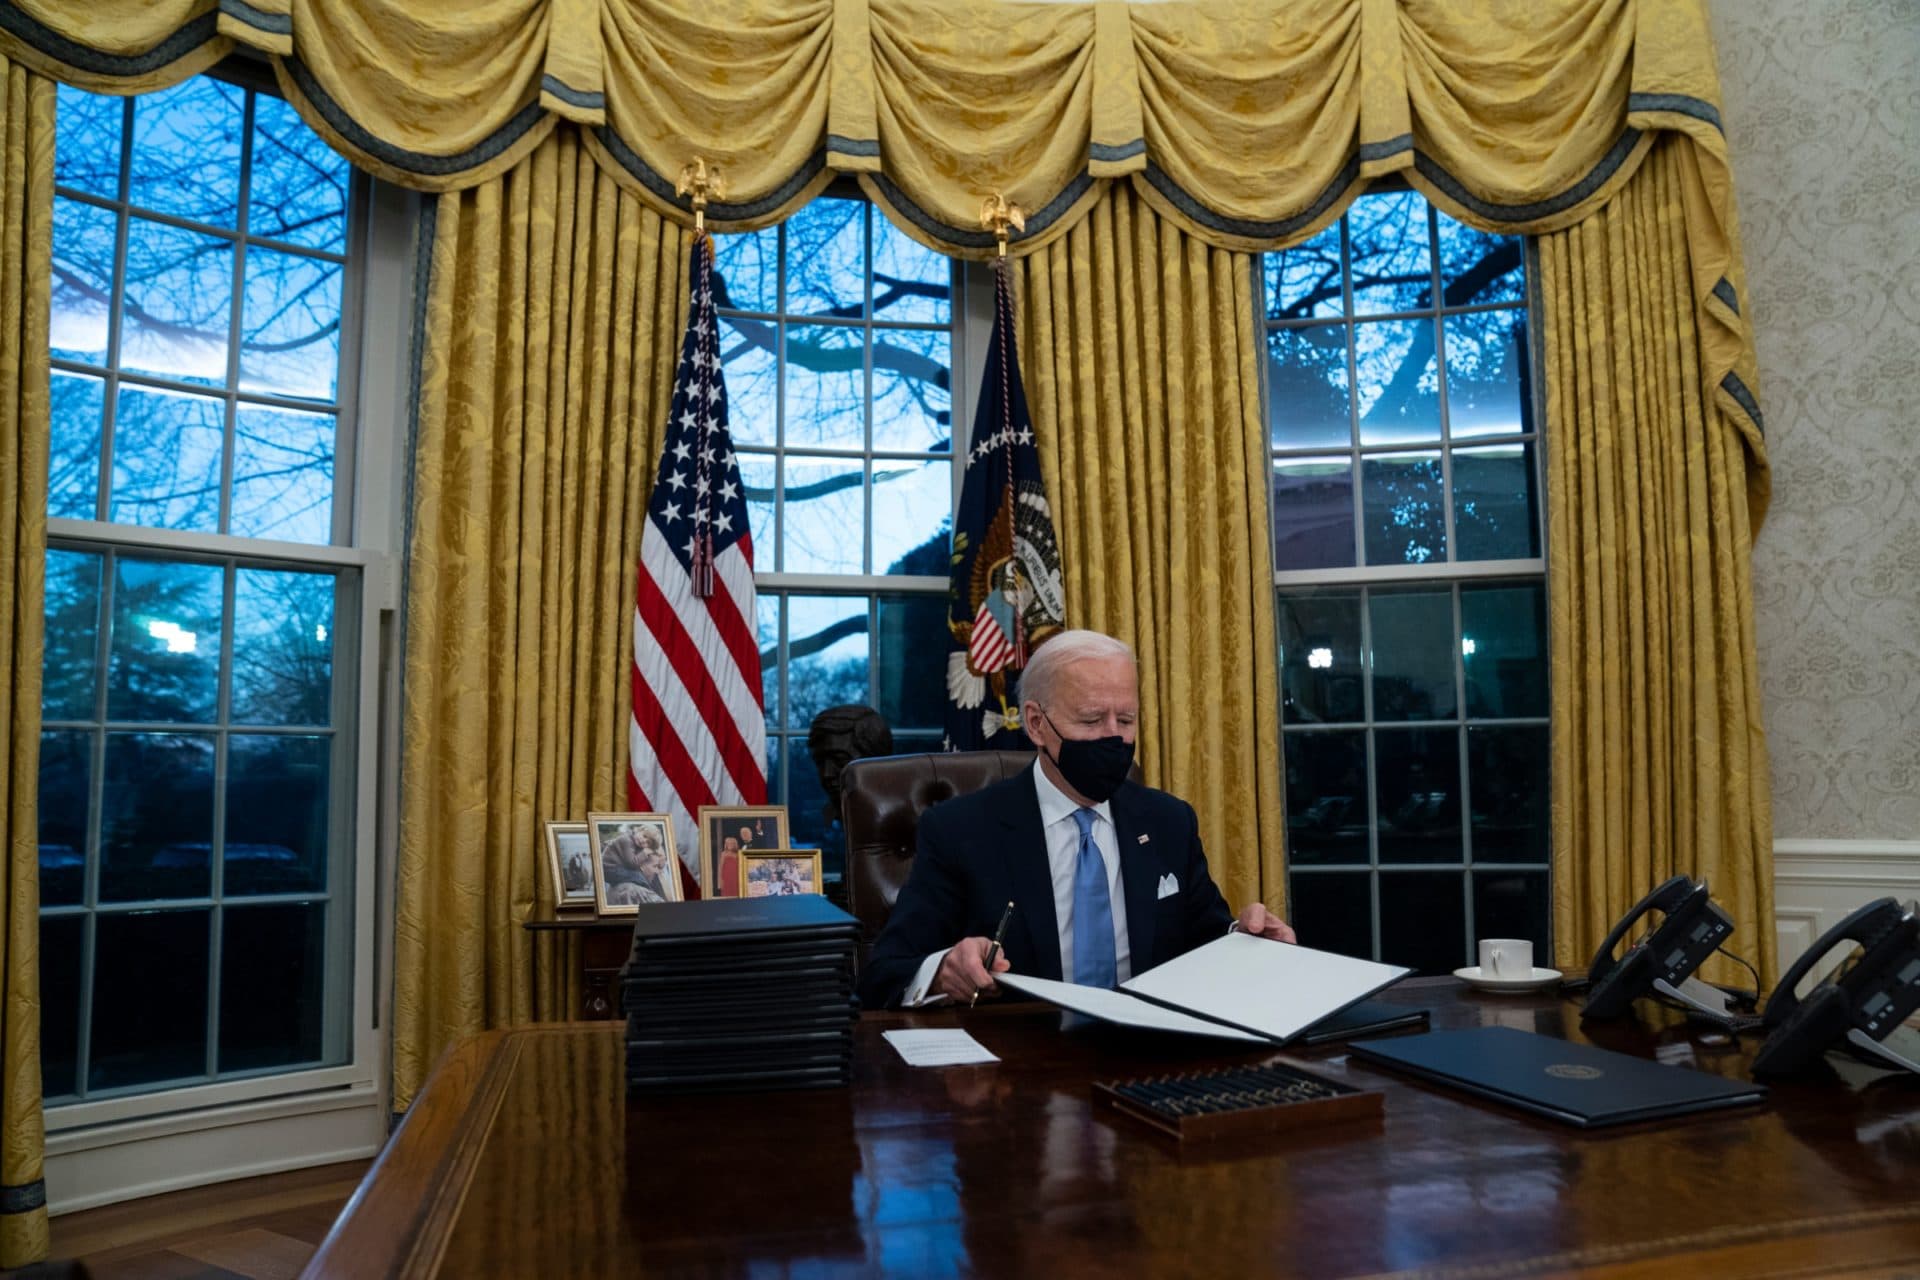 President Joe Biden signs a series of executive orders in the Oval Office on Wednesday night. (Evan Vucci/AP)